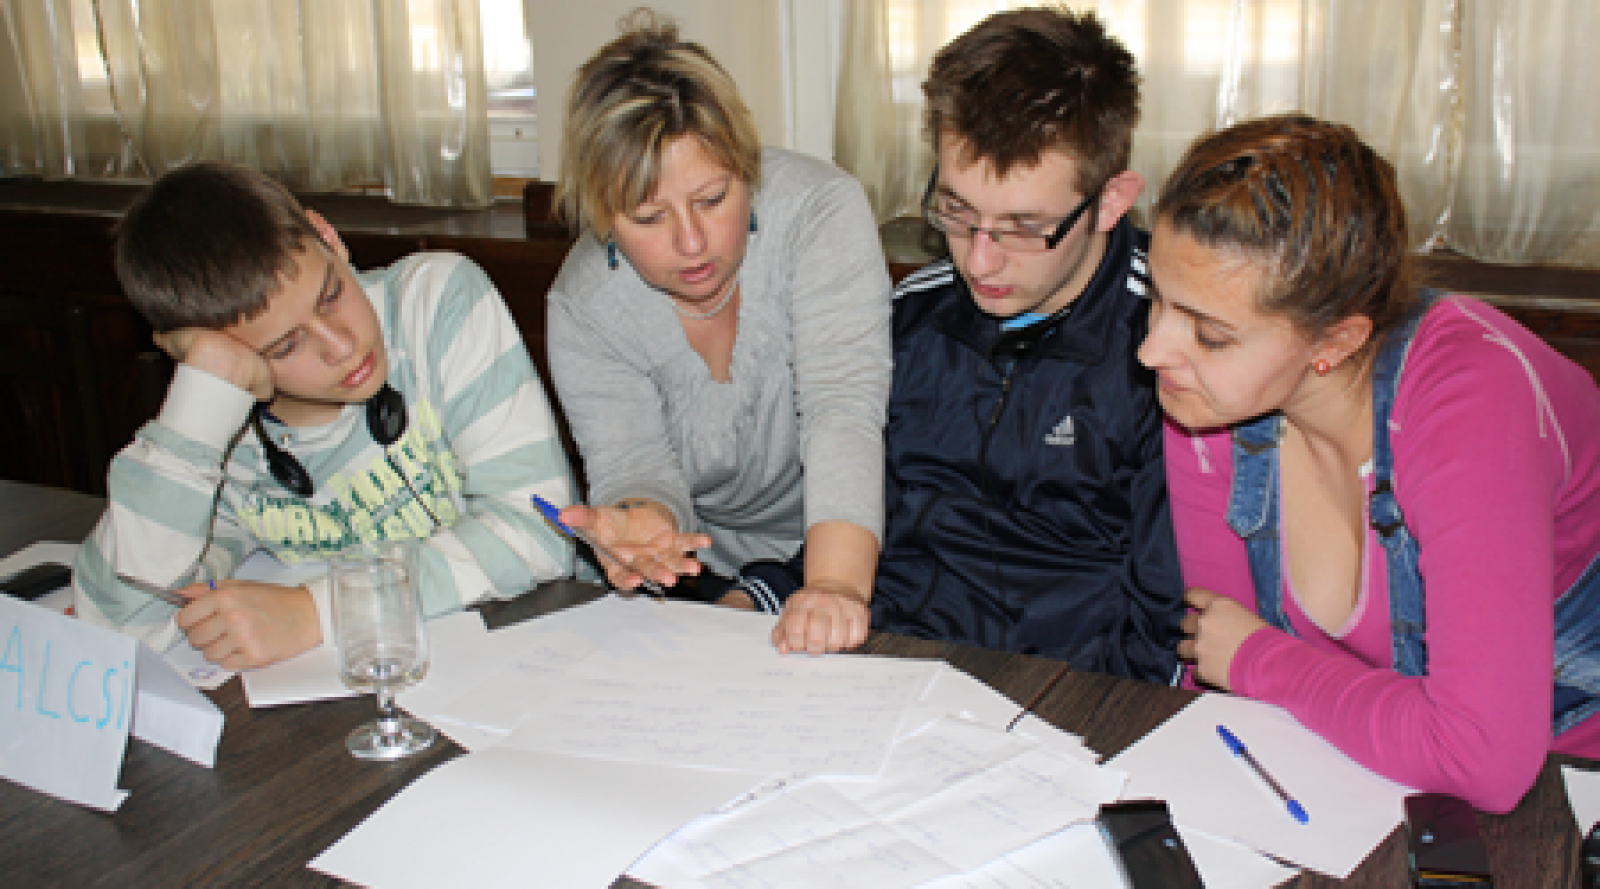 Civic Engagement Helps Lower Barriers Between Roma and Non-Roma Youth